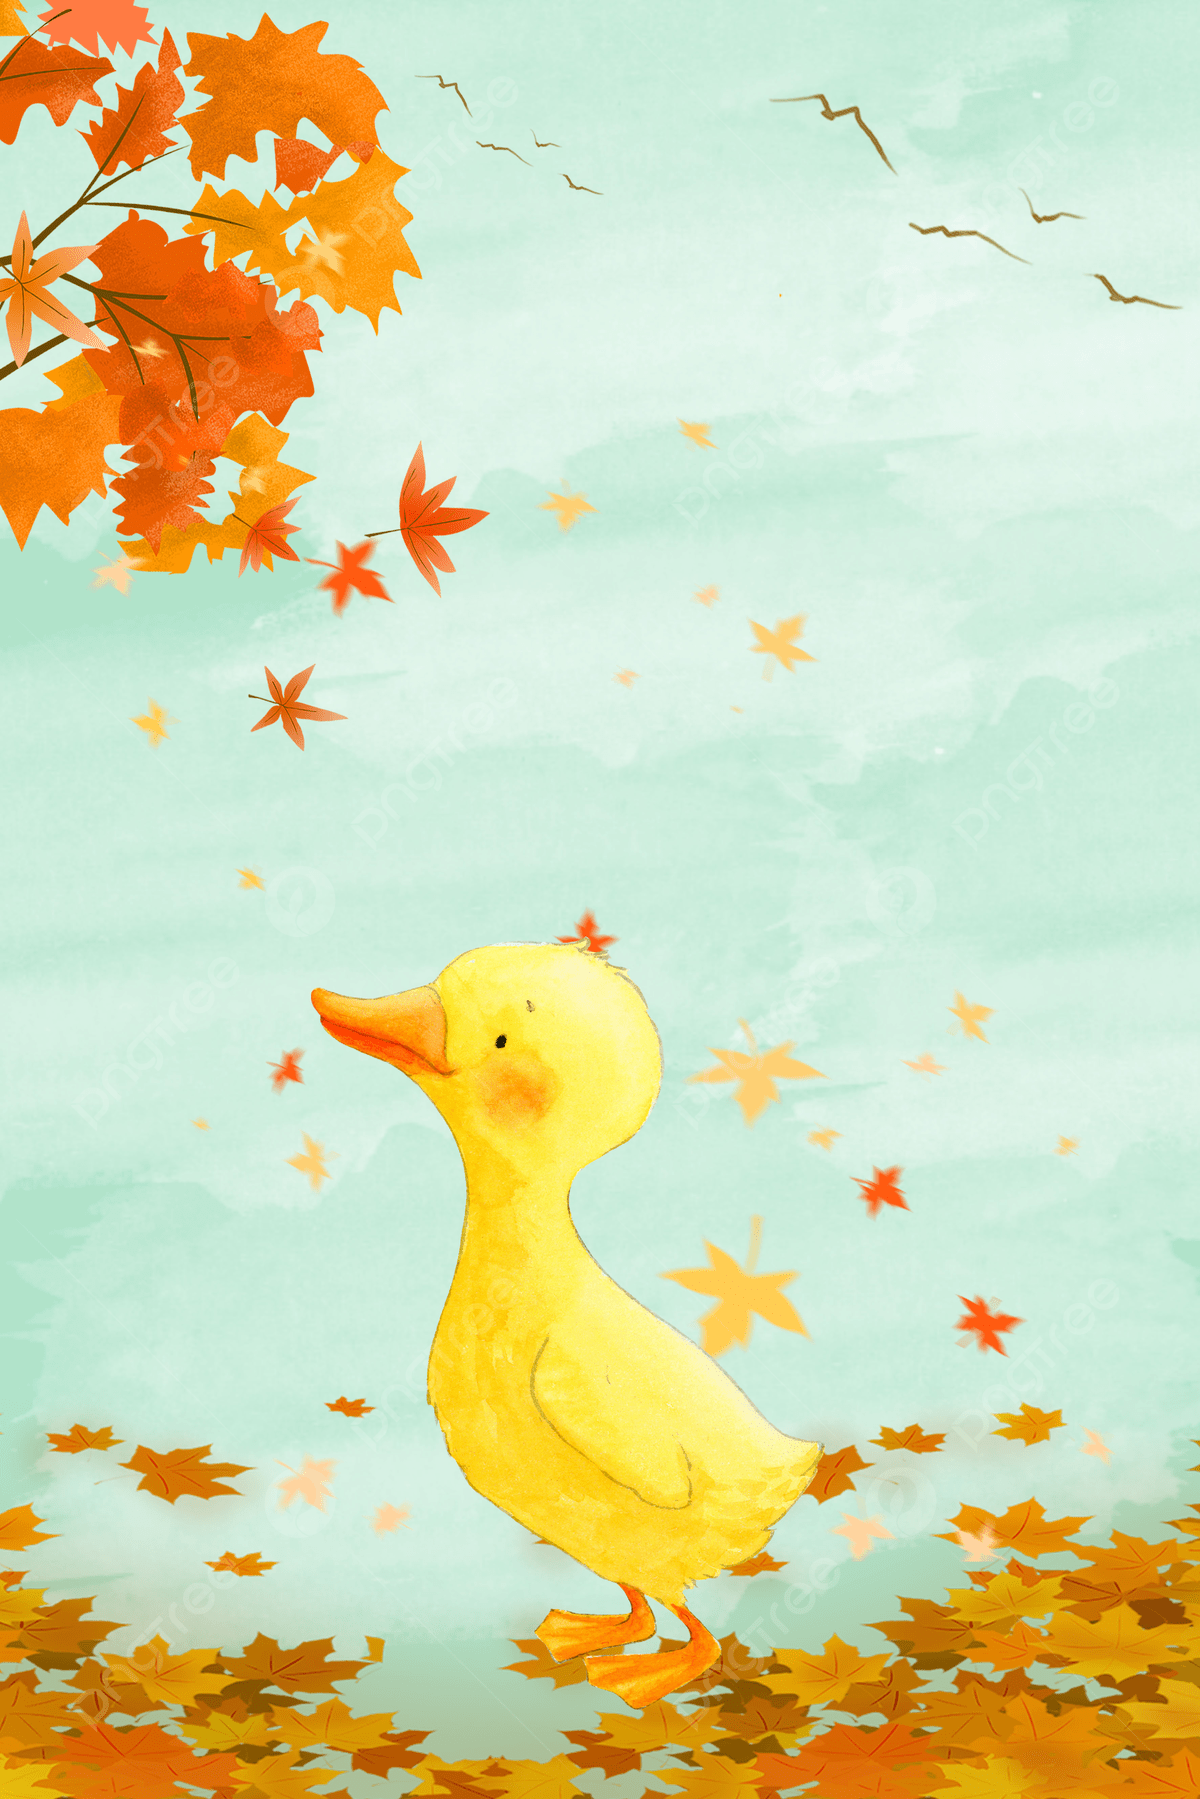 Cute Duck Background Image, HD Picture and Wallpaper For Free Download